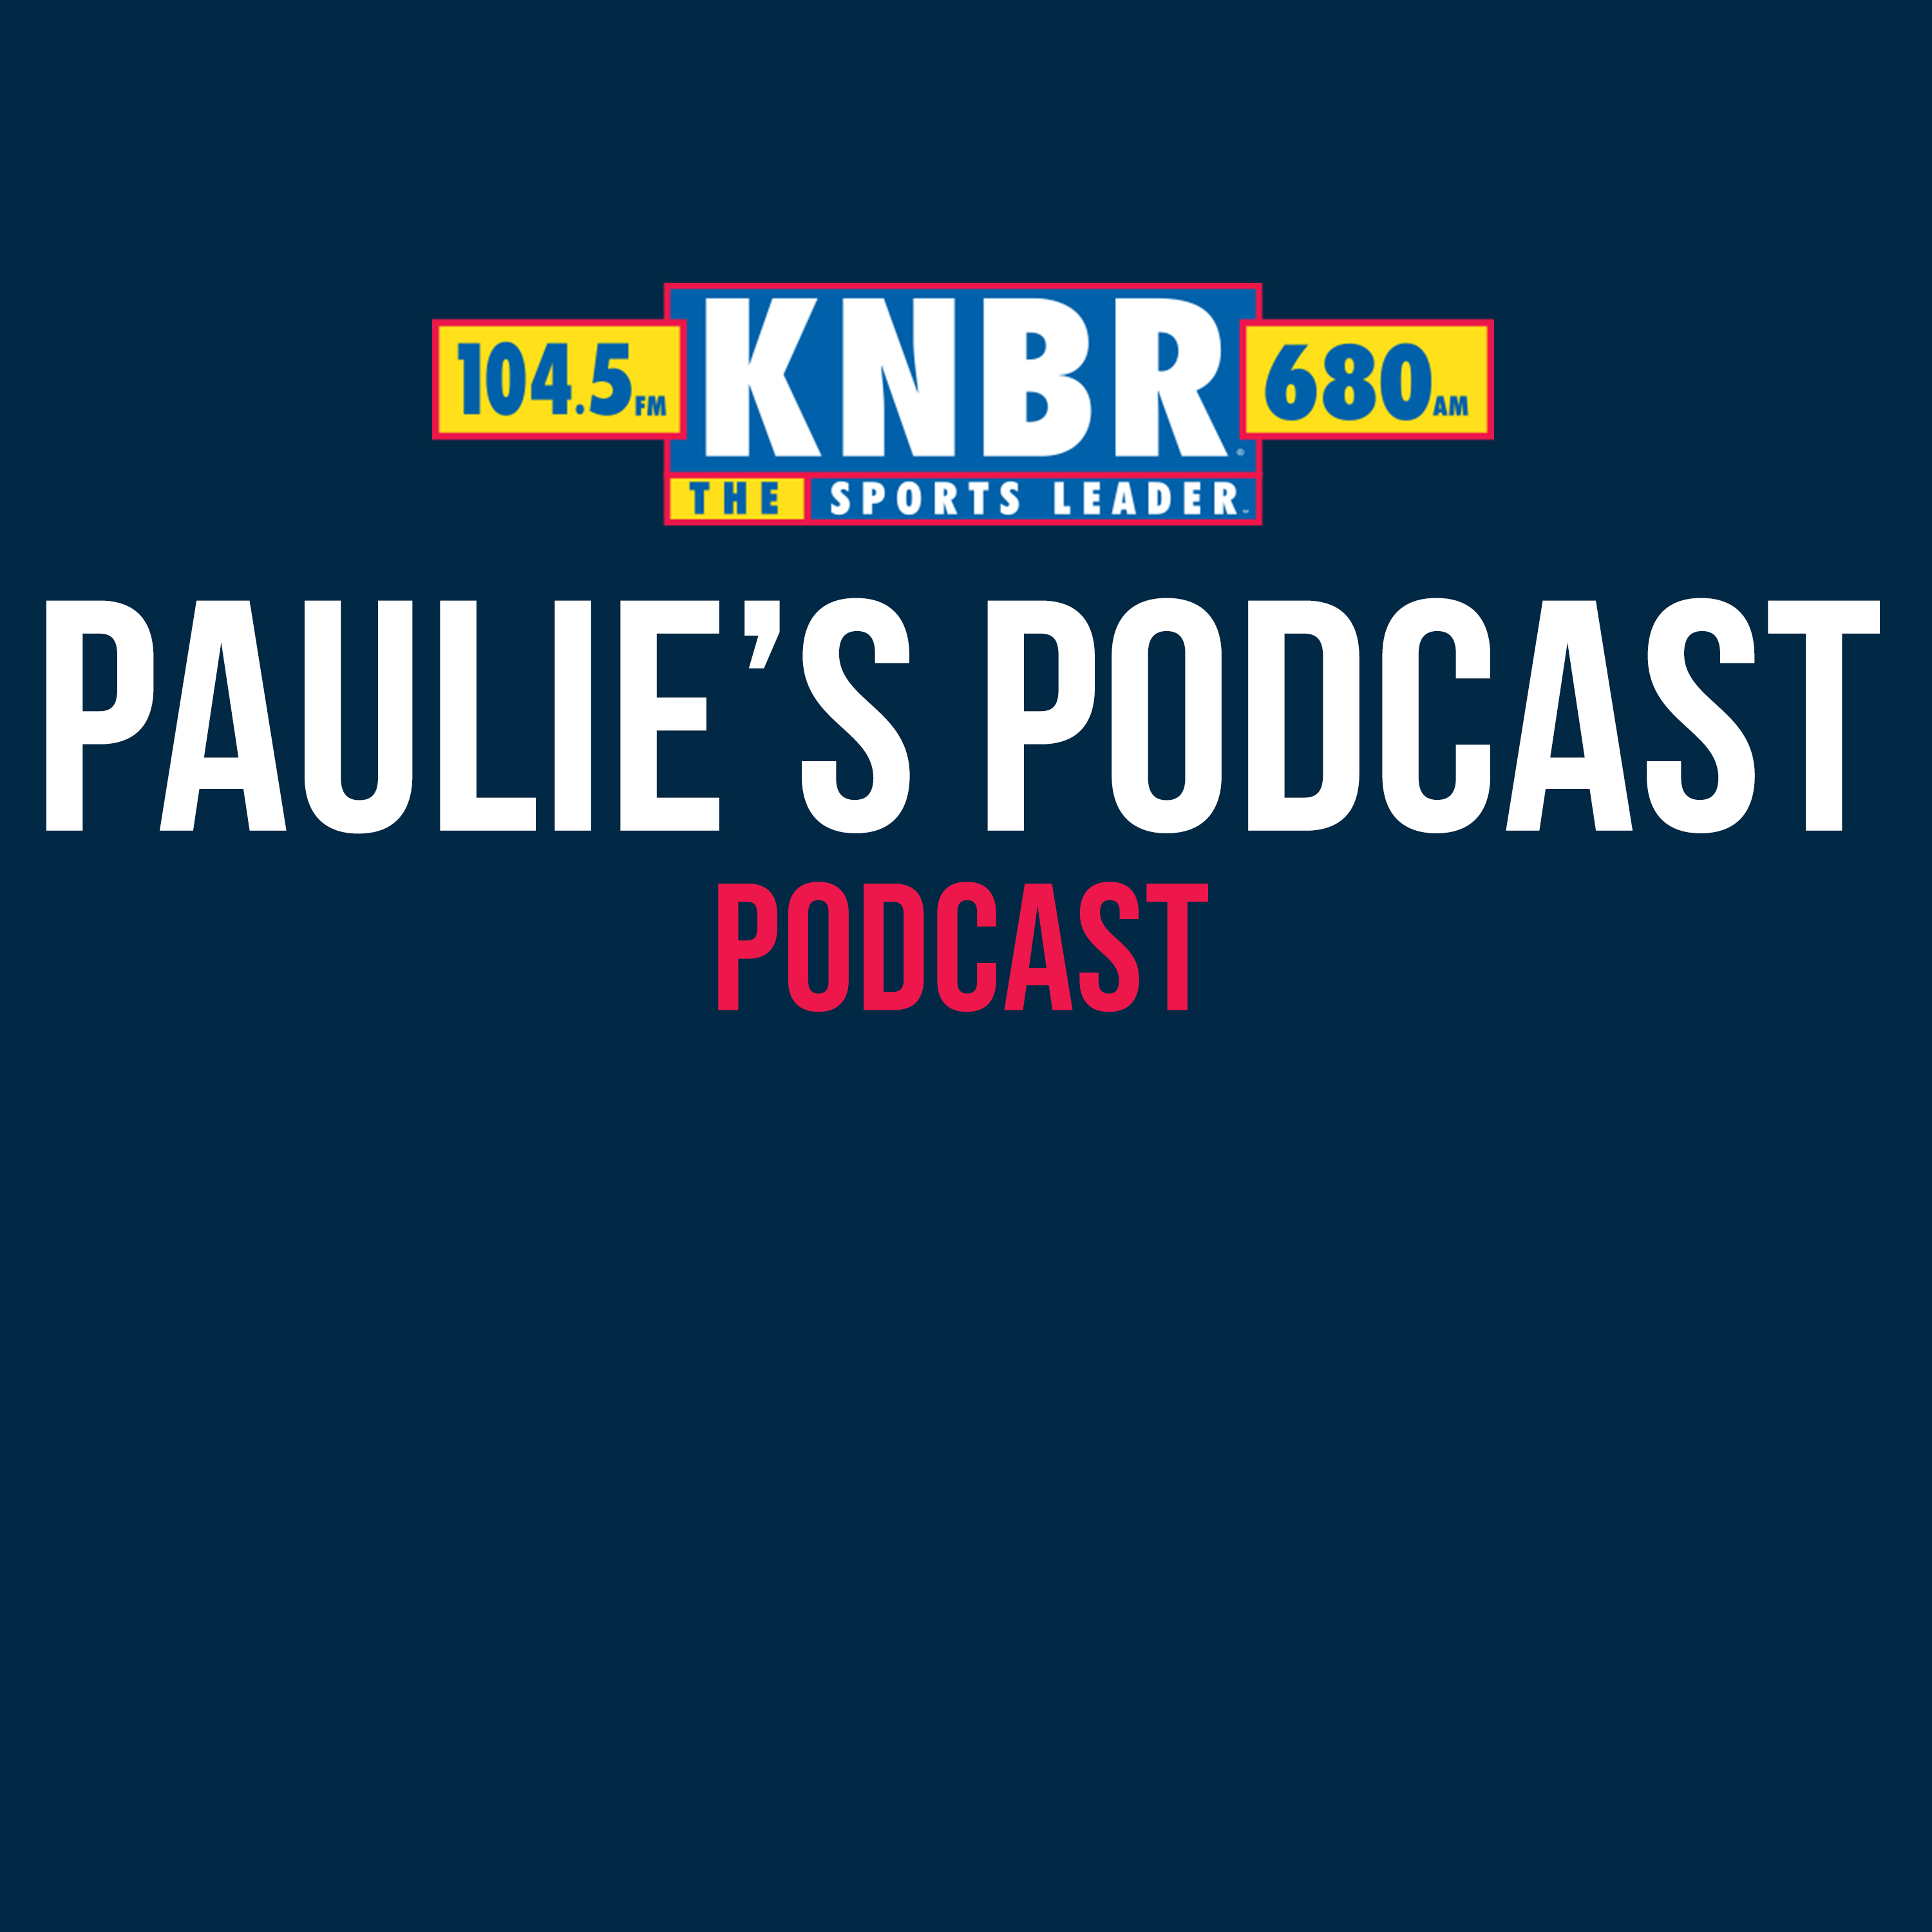 12/17 Paulie's Podcast:   Curry's Record, Niners Playoff Push & Metallica's 40th Anniversary